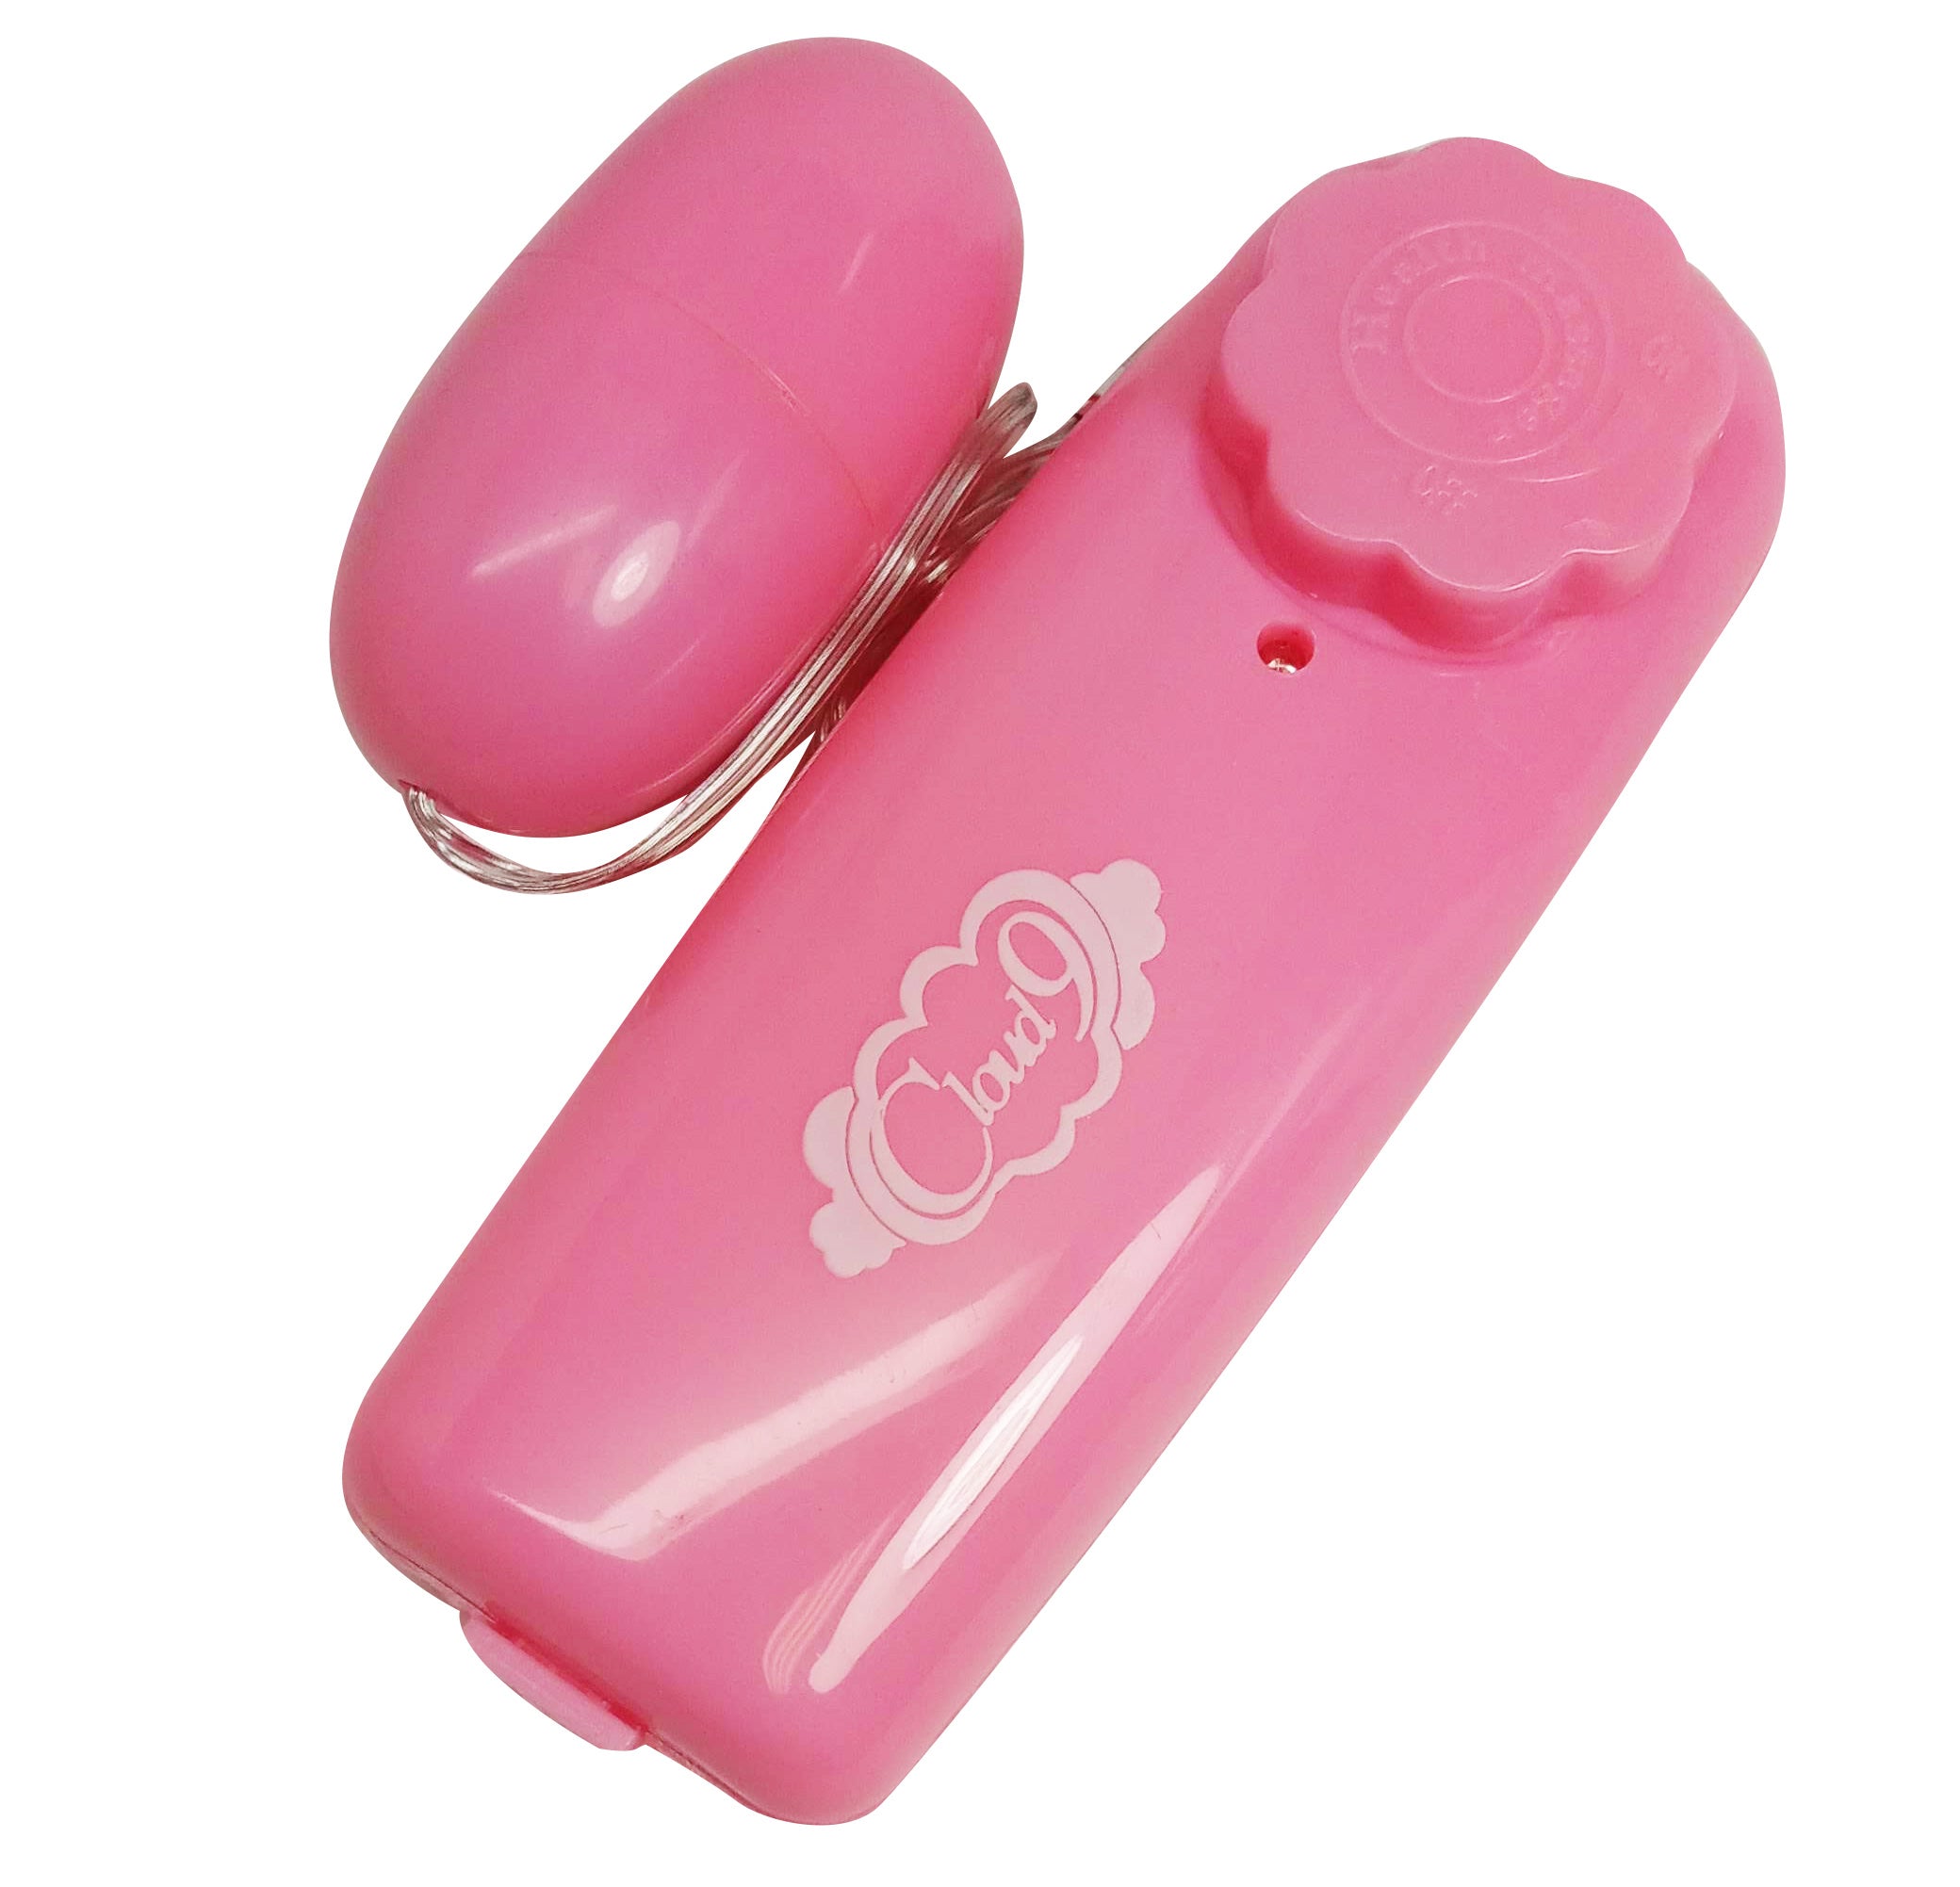 Sensual Delight in Cloud 9 Vibrating Bullet with remote